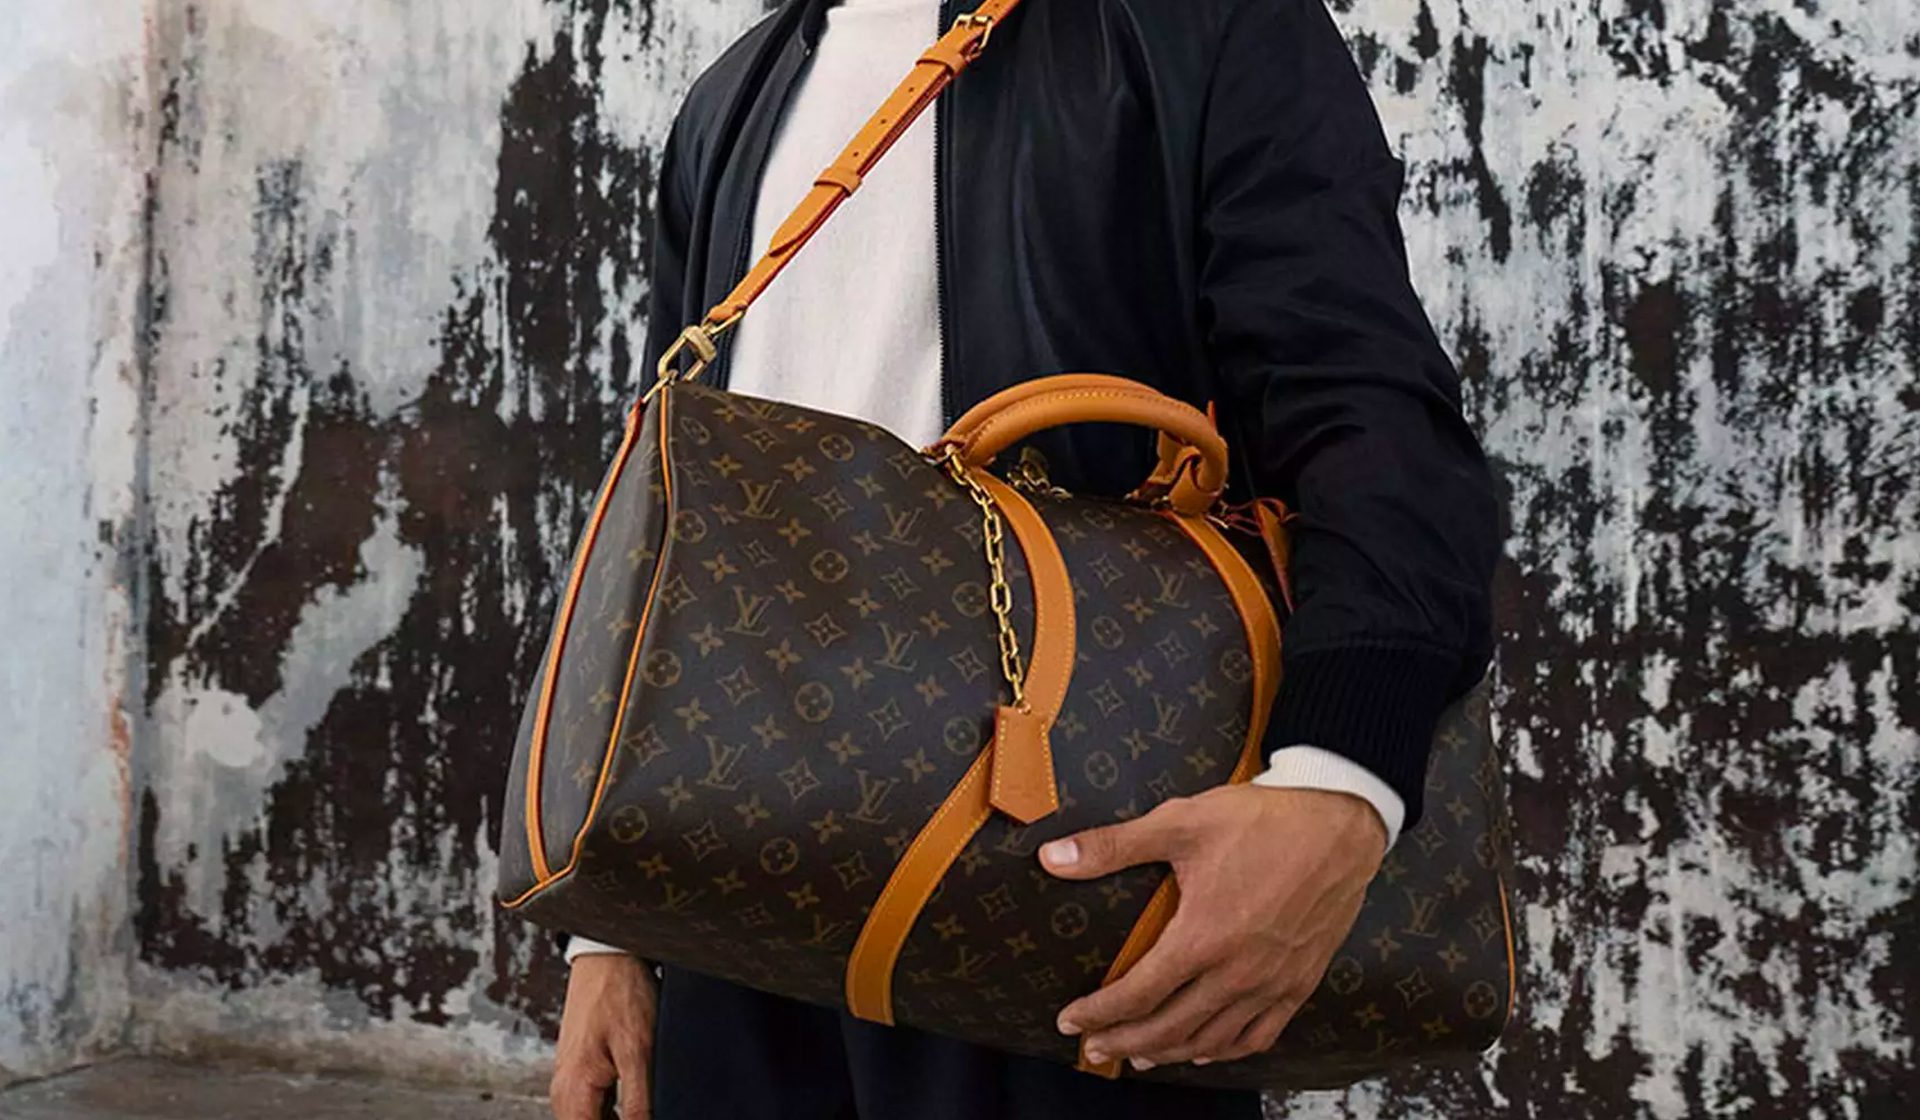 Coveted Classics: Discover Louis Vuitton's Most Timeless Iconic